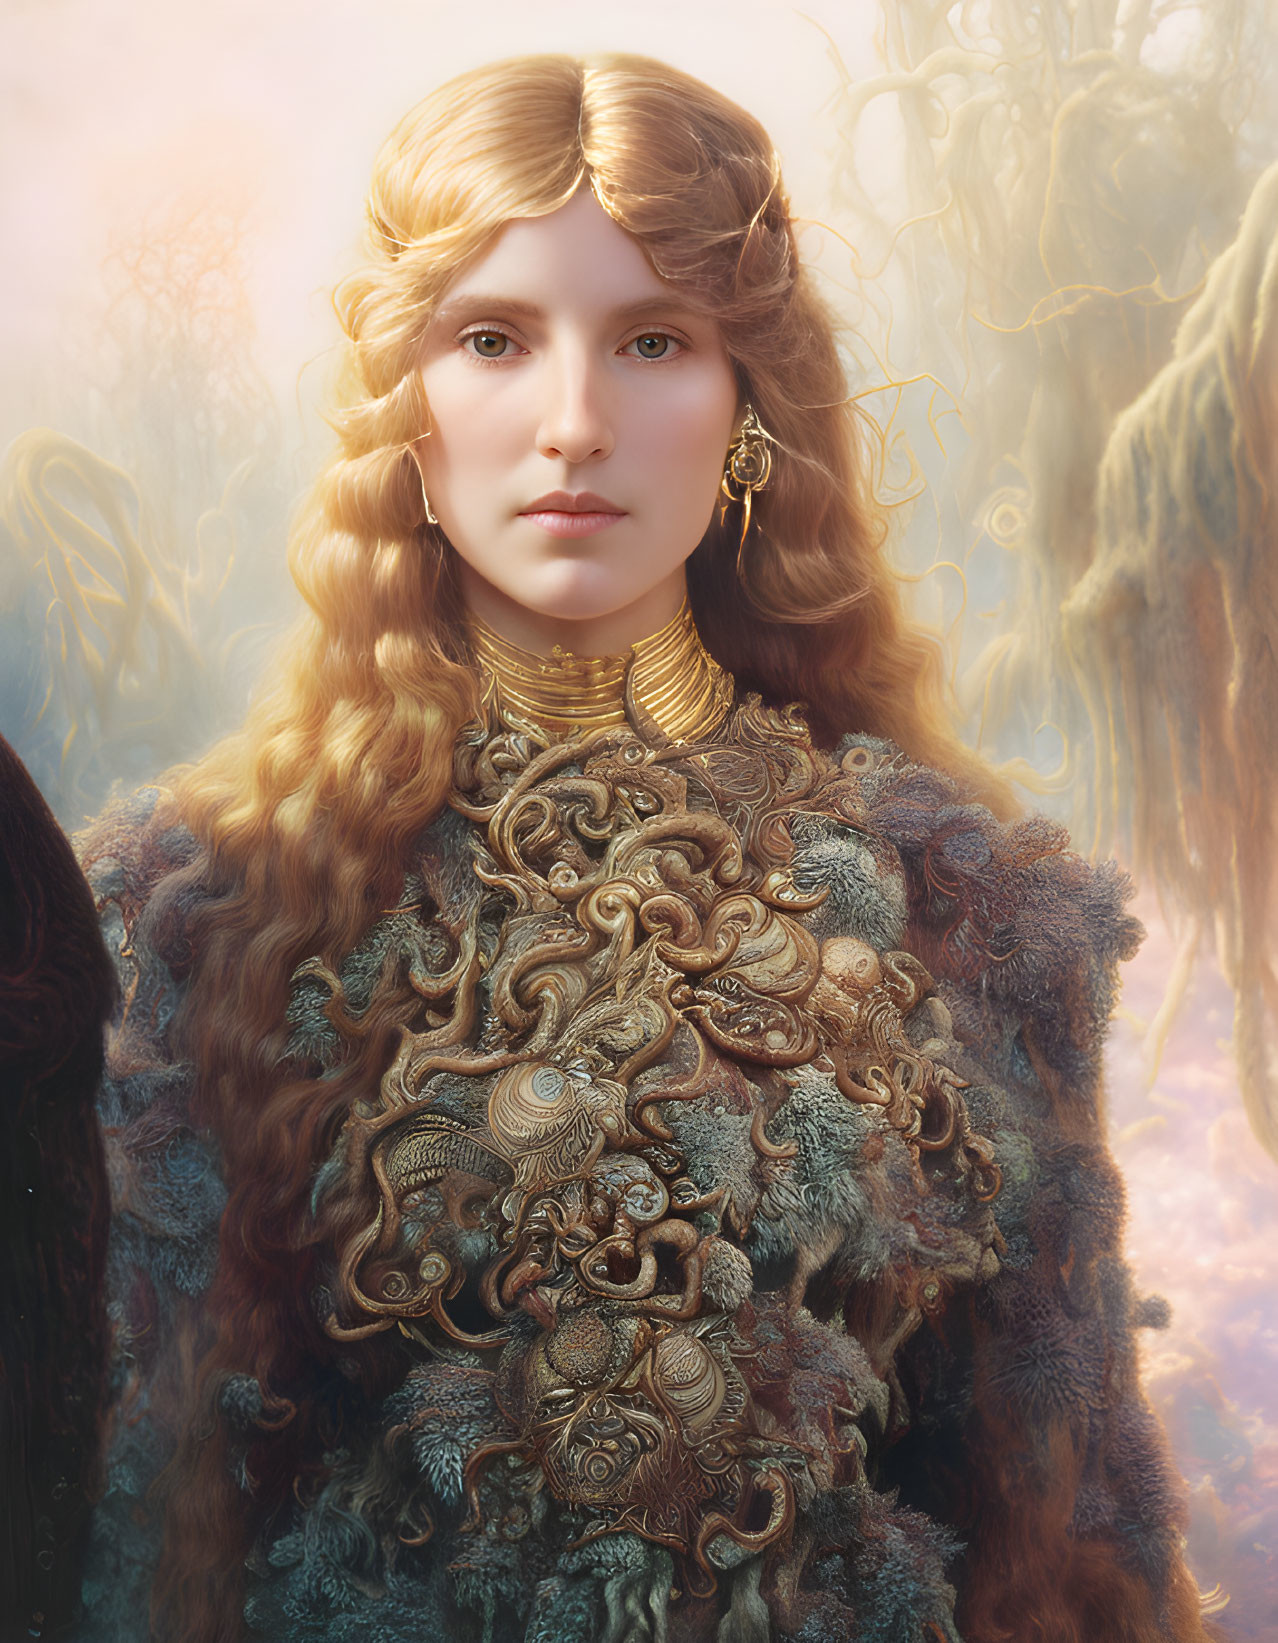 Golden-haired woman adorned in elaborate gold jewelry and intricate garment against misty backdrop